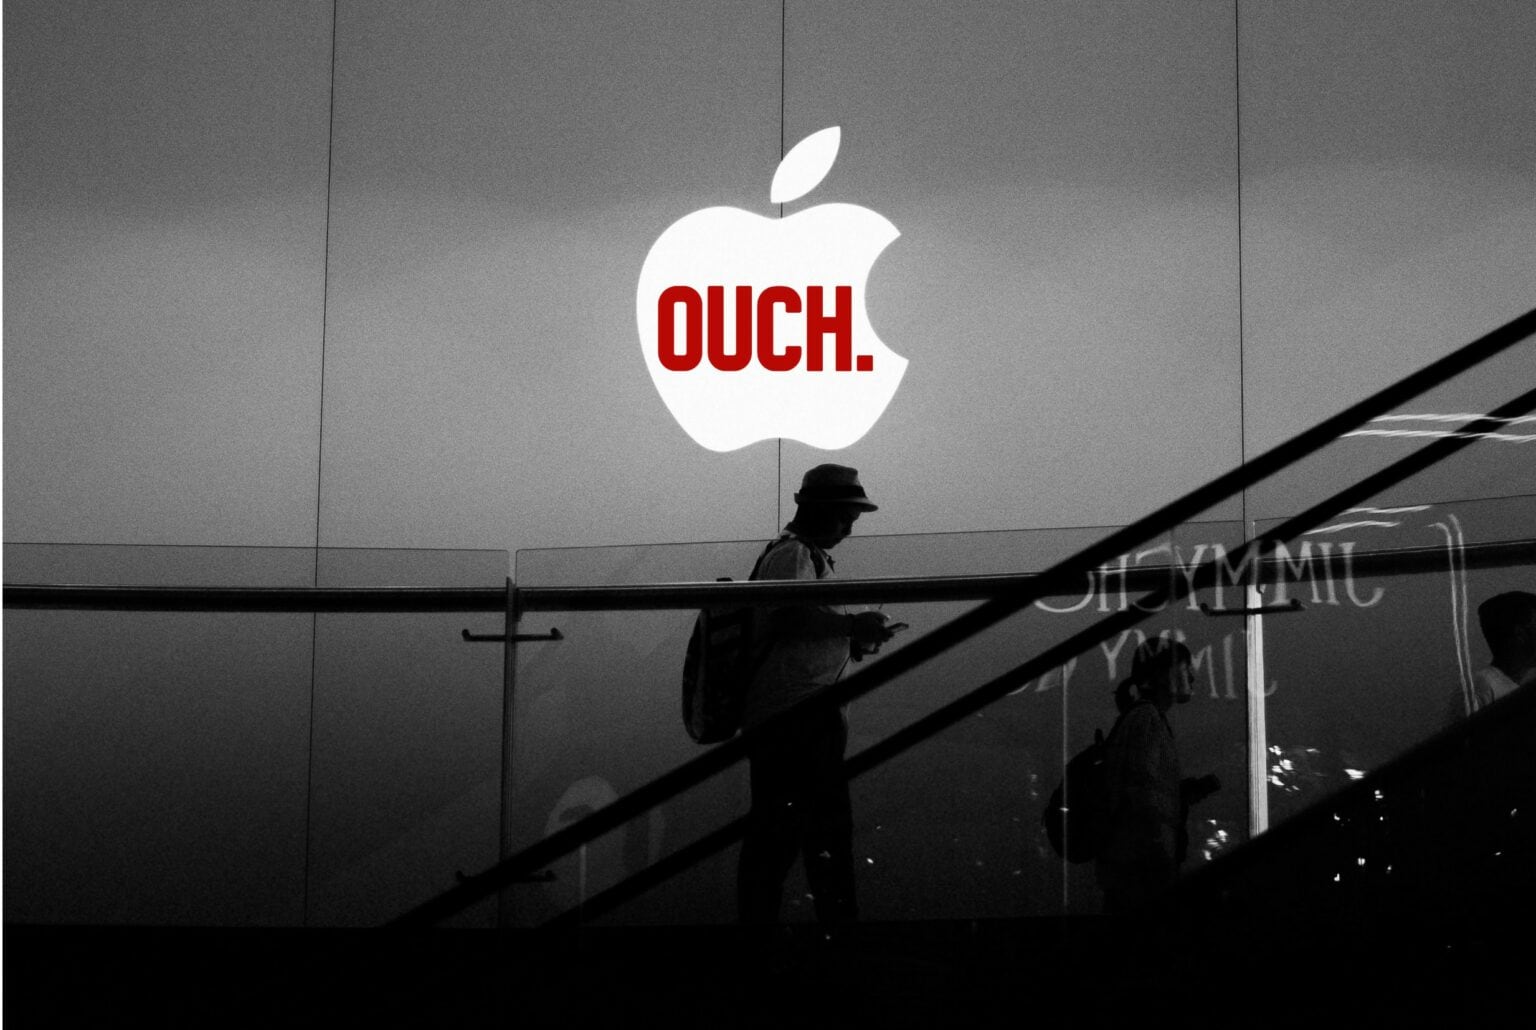 Apple Q4 2021 earnings call: Supply chain woes cost Apple an estimated $6 billion in revenues last quarter.